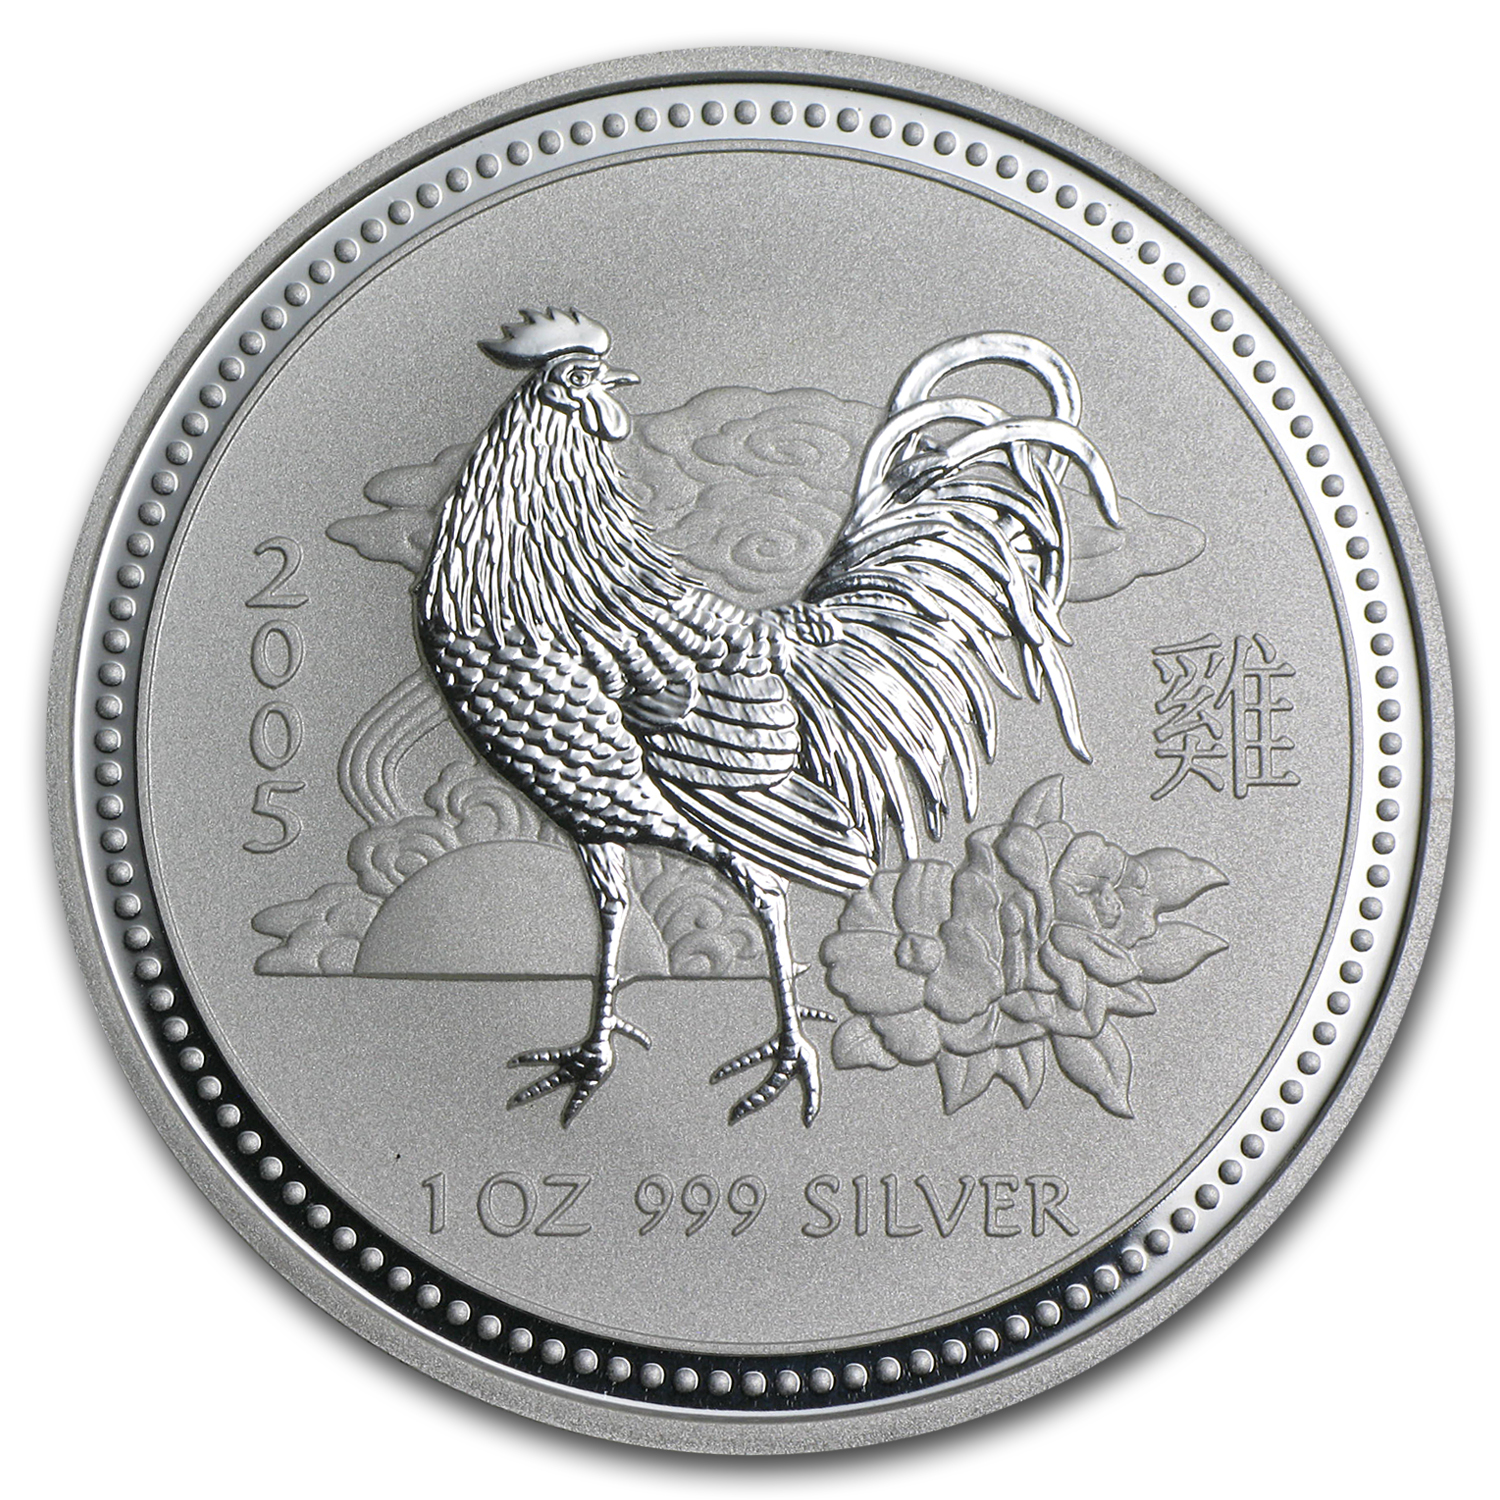 Buy 2005 1 oz Silver Year of the Rooster BU Series I | APMEX